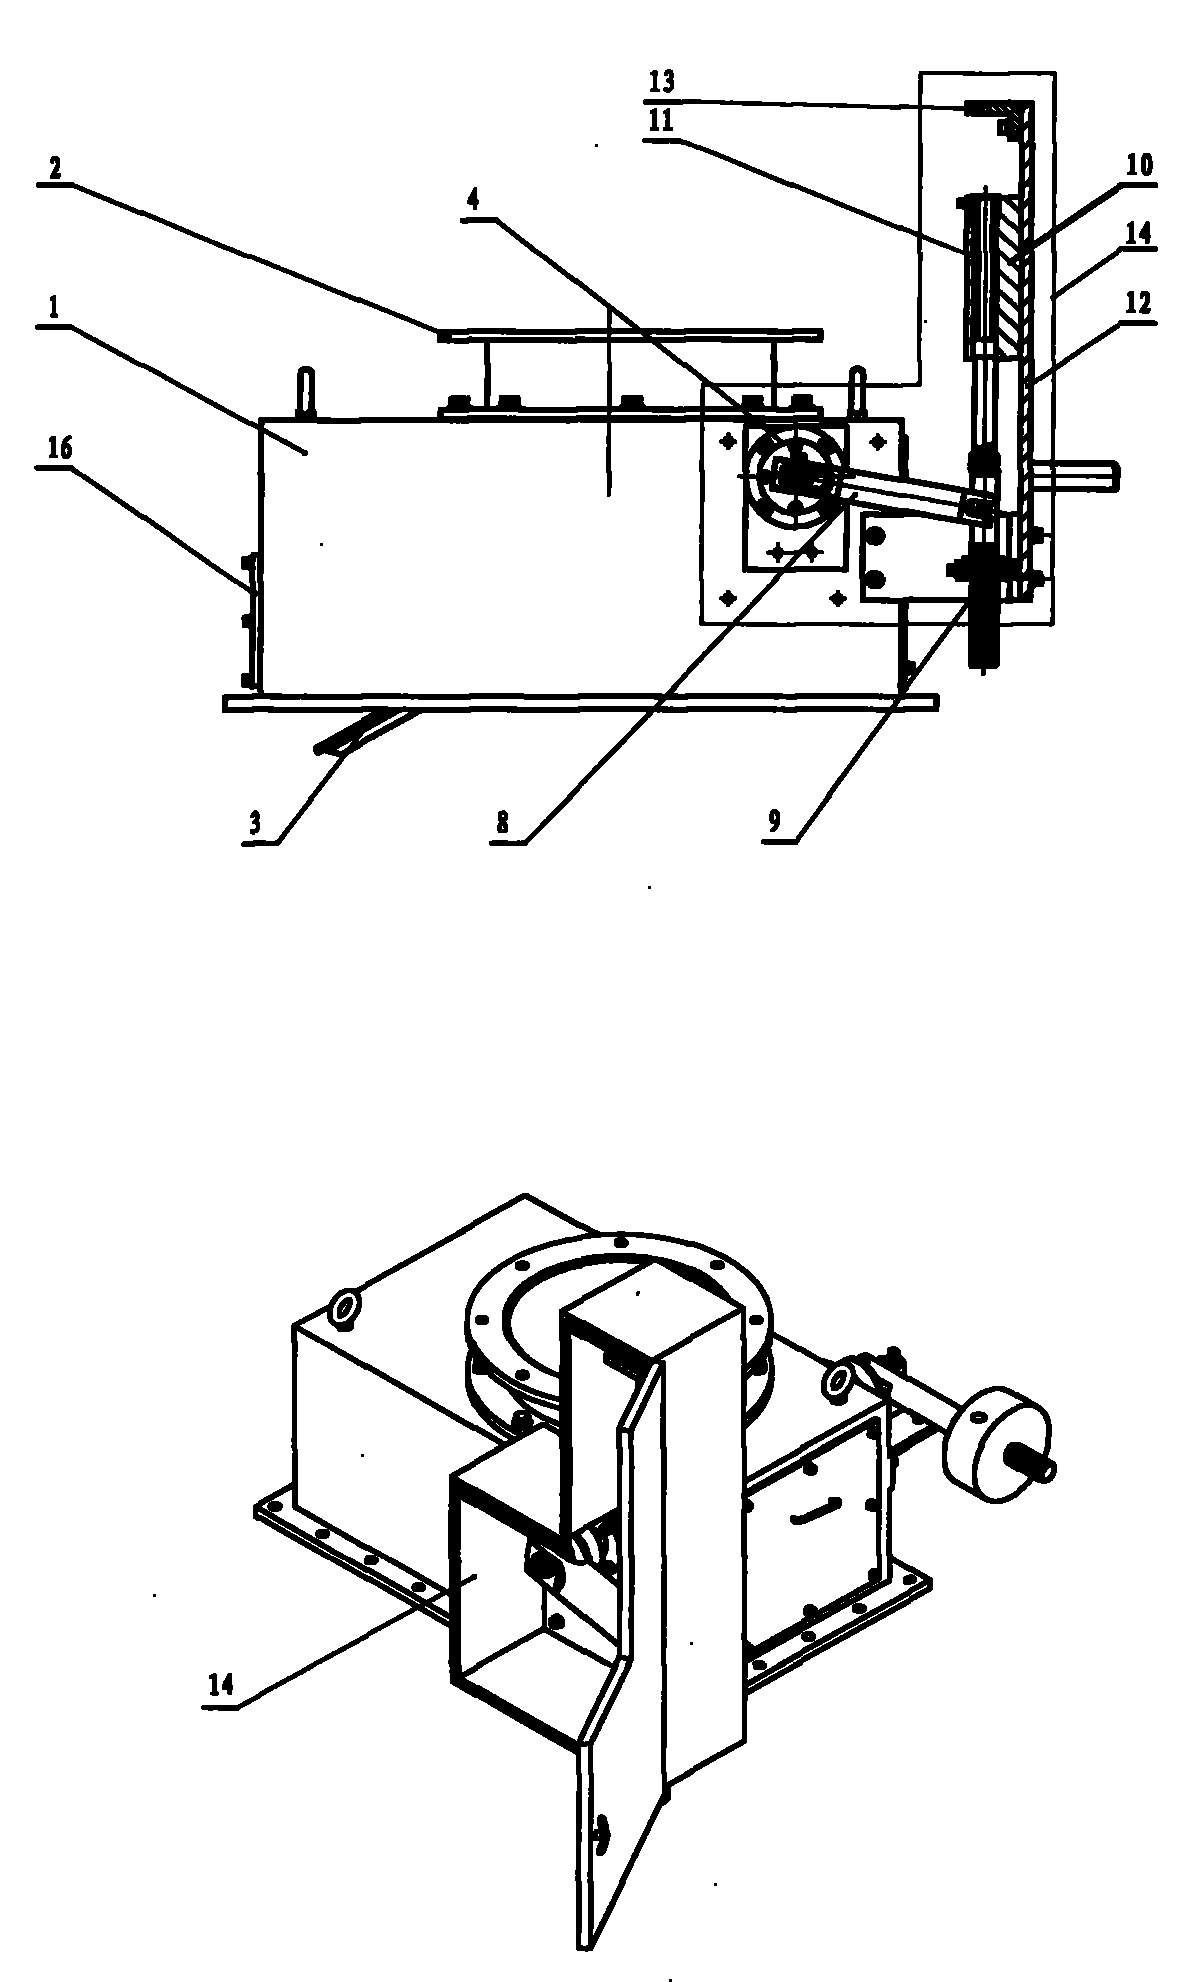 Accurate measurement device of powder